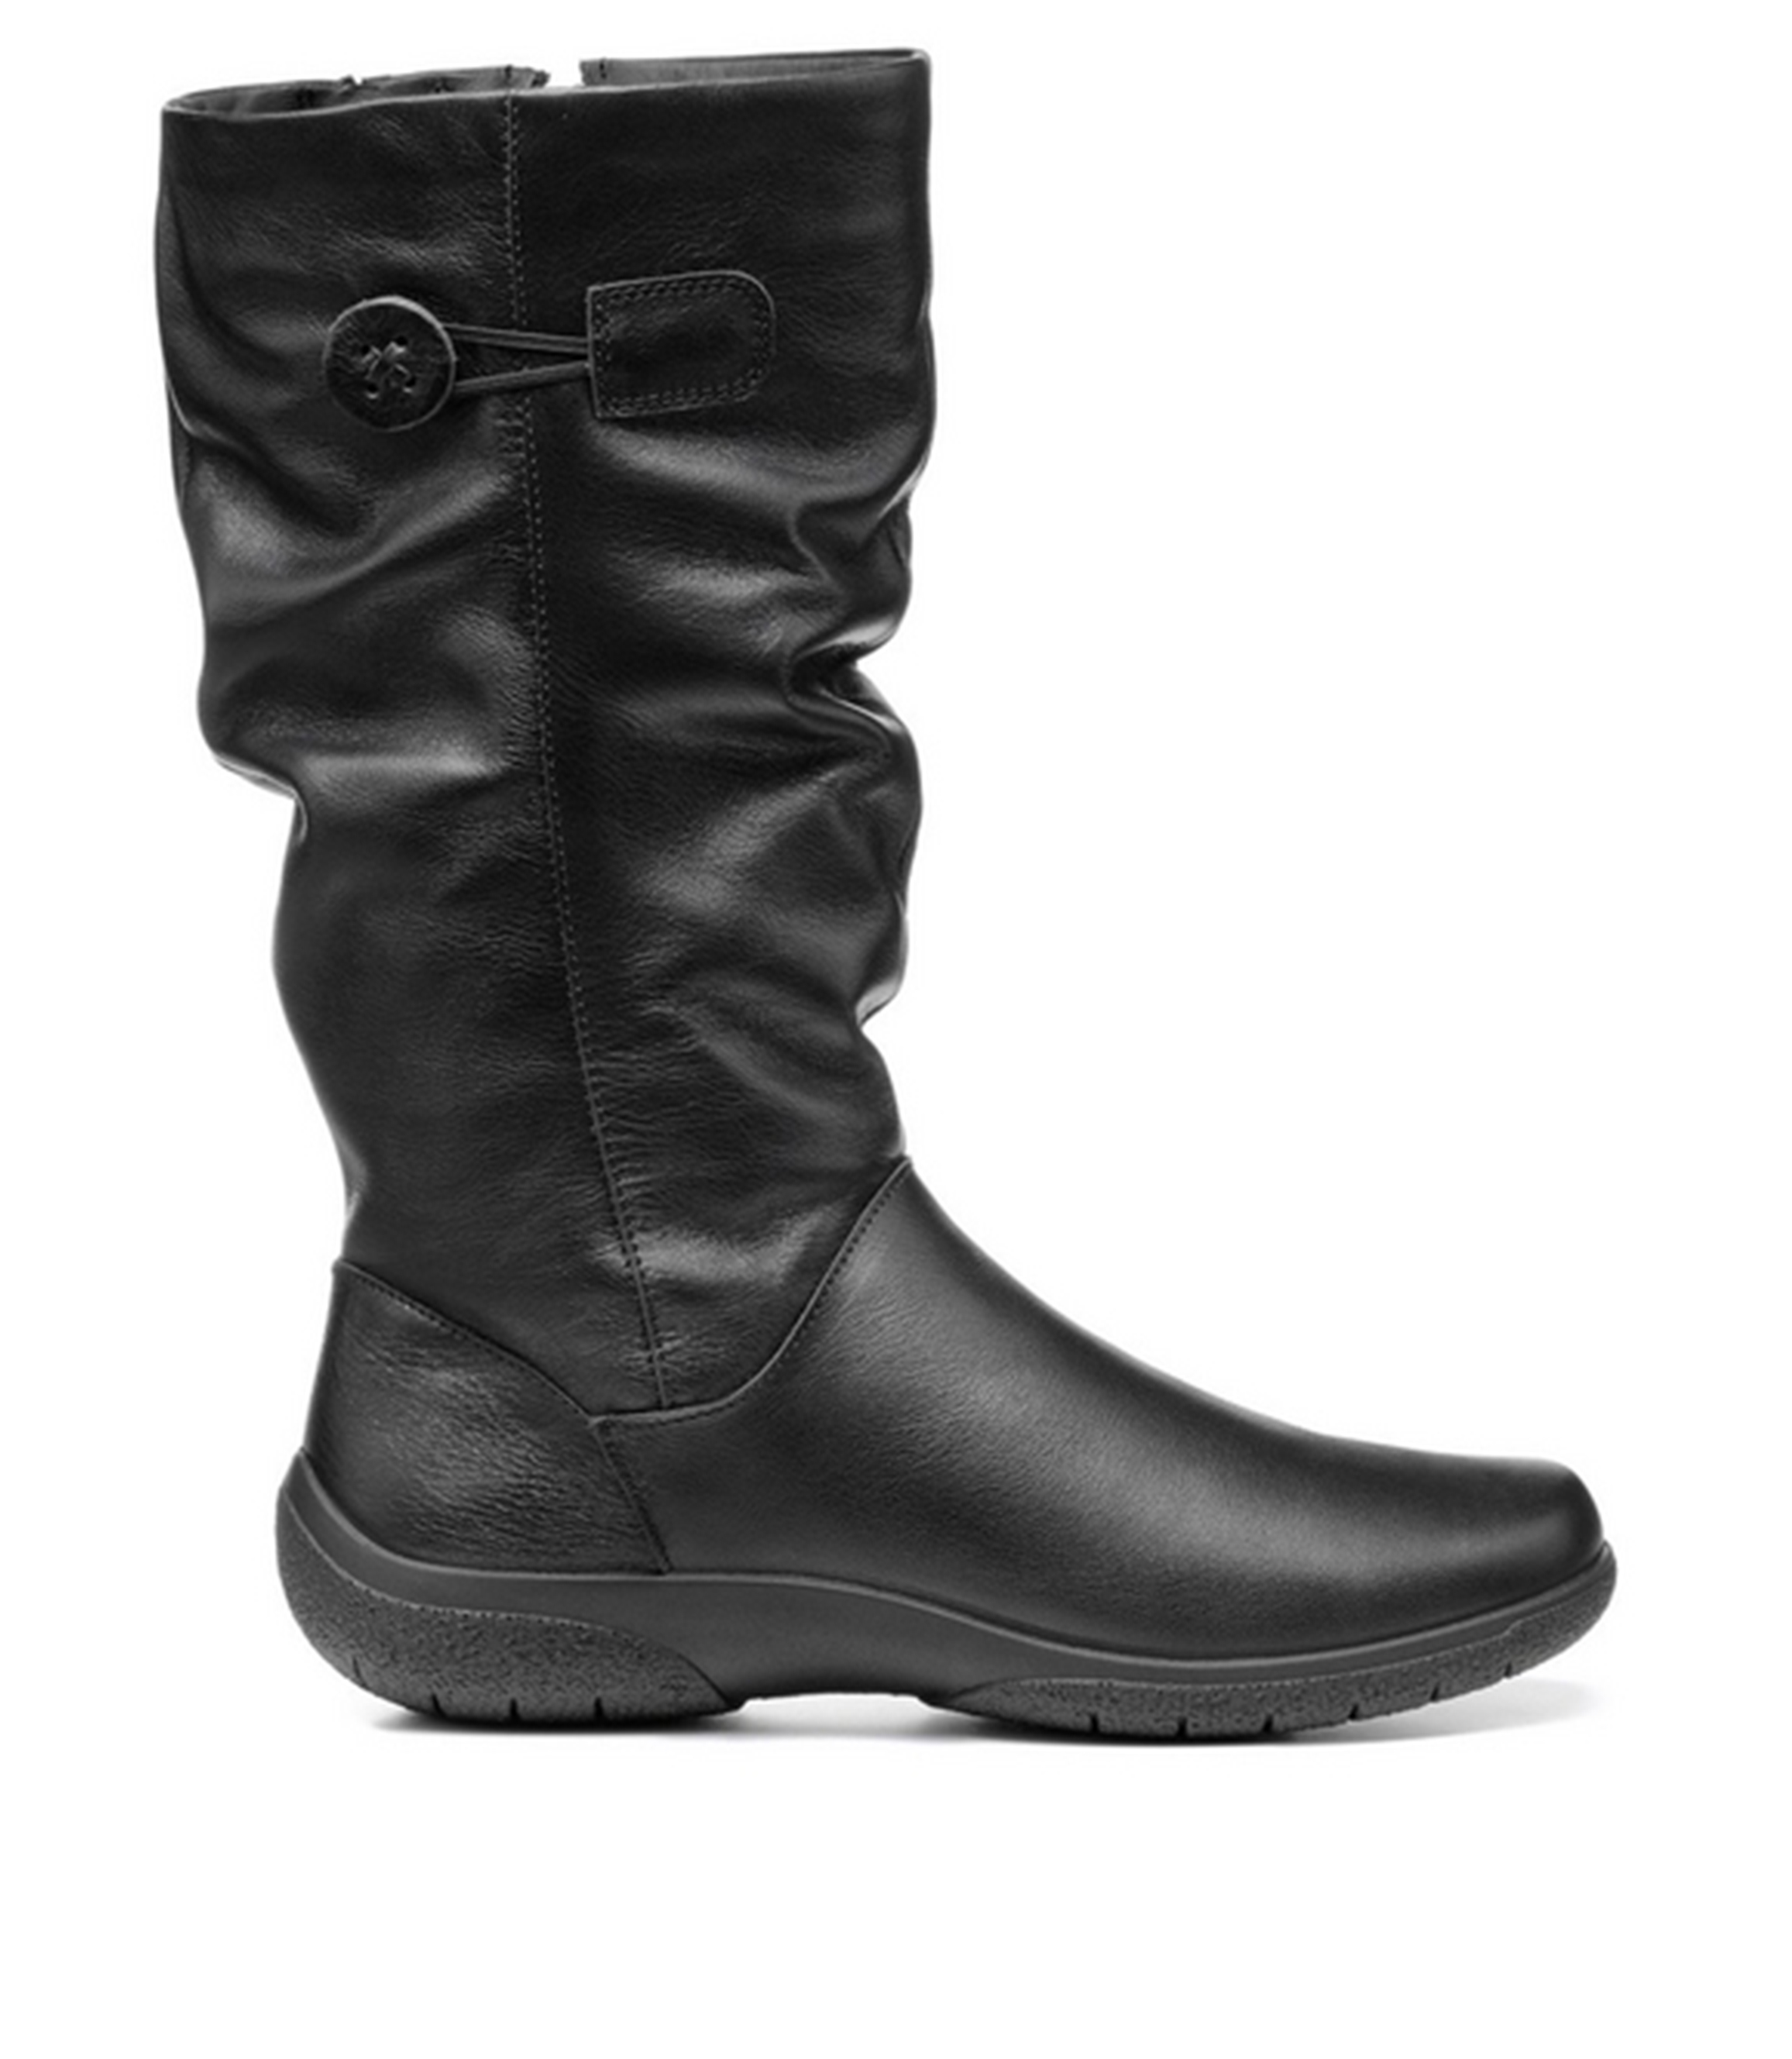 HOTTER BLACK LEATHER DERRYMORE BOOTS | Rosella - Style inspired by elegance